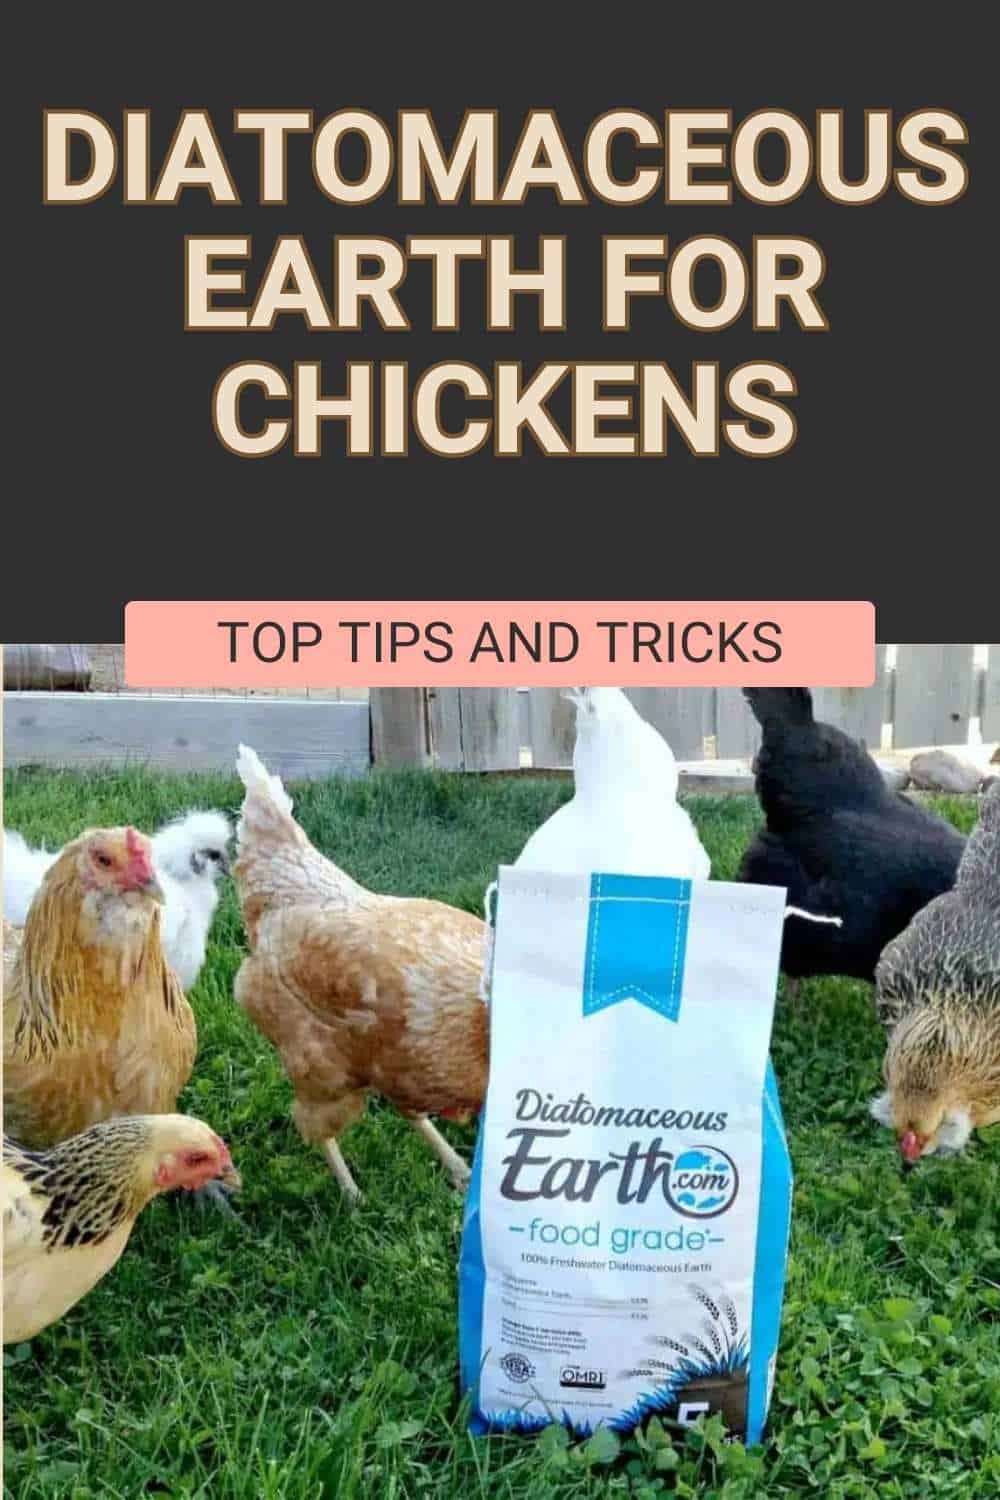 How to Use Diatomaceous Earth for Chickens